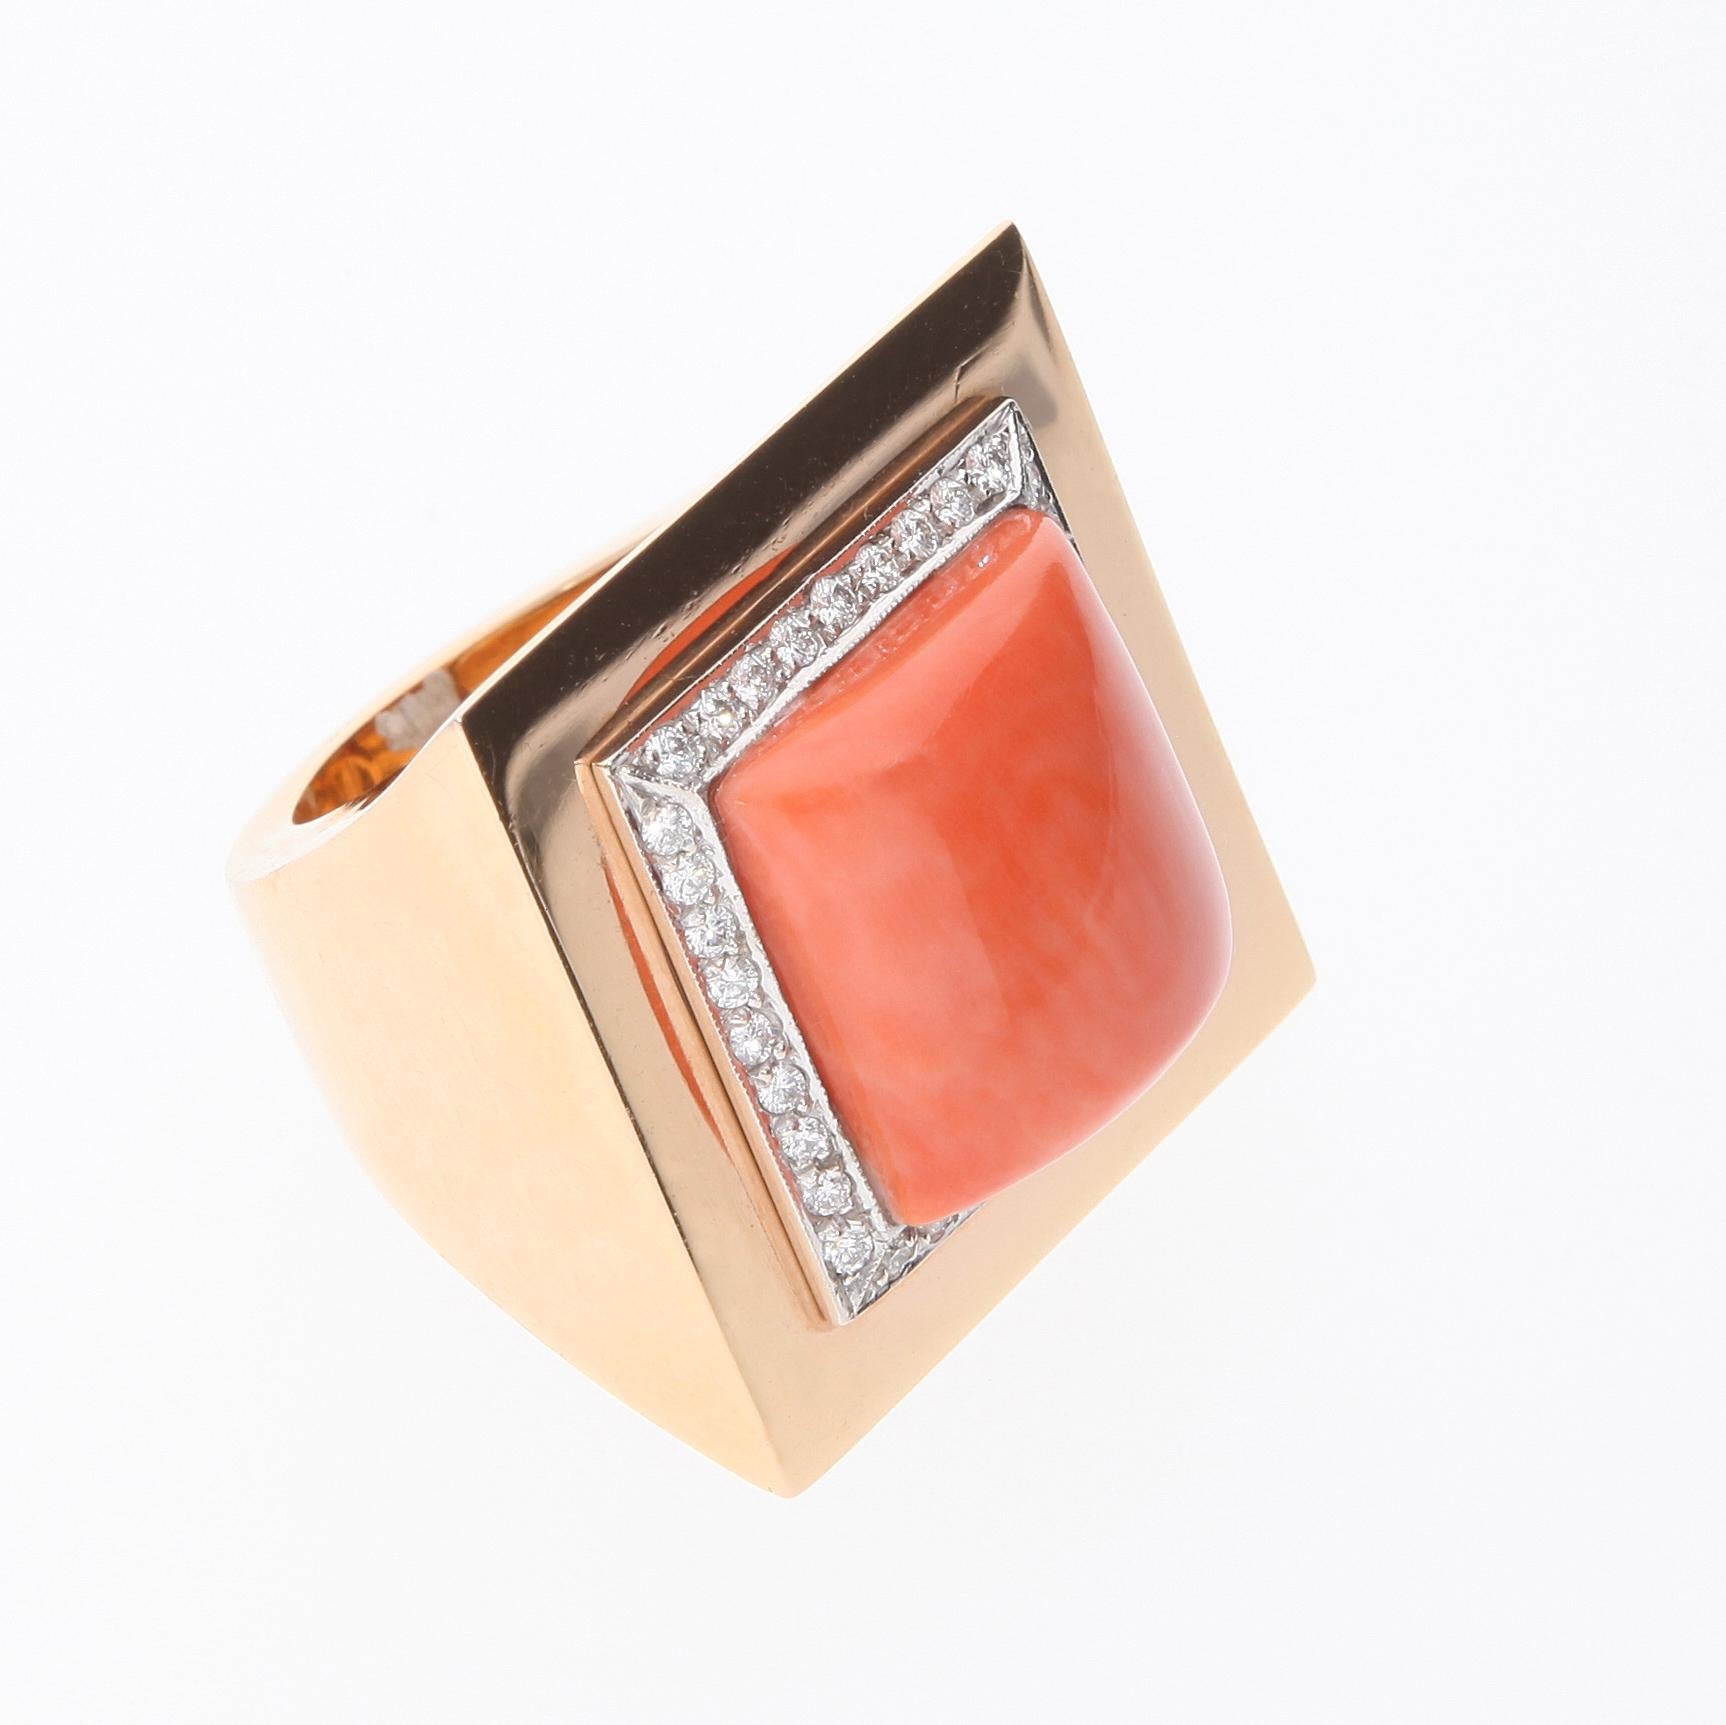 Ring has a natural salmon colored coral, convex shape, fancy cut. 
The coral is surrounded by 36 diamonds set on a white gold rail.
The ring has a spring inside which allows you to easily reduce the size, and therefore also to wear it on fingers of